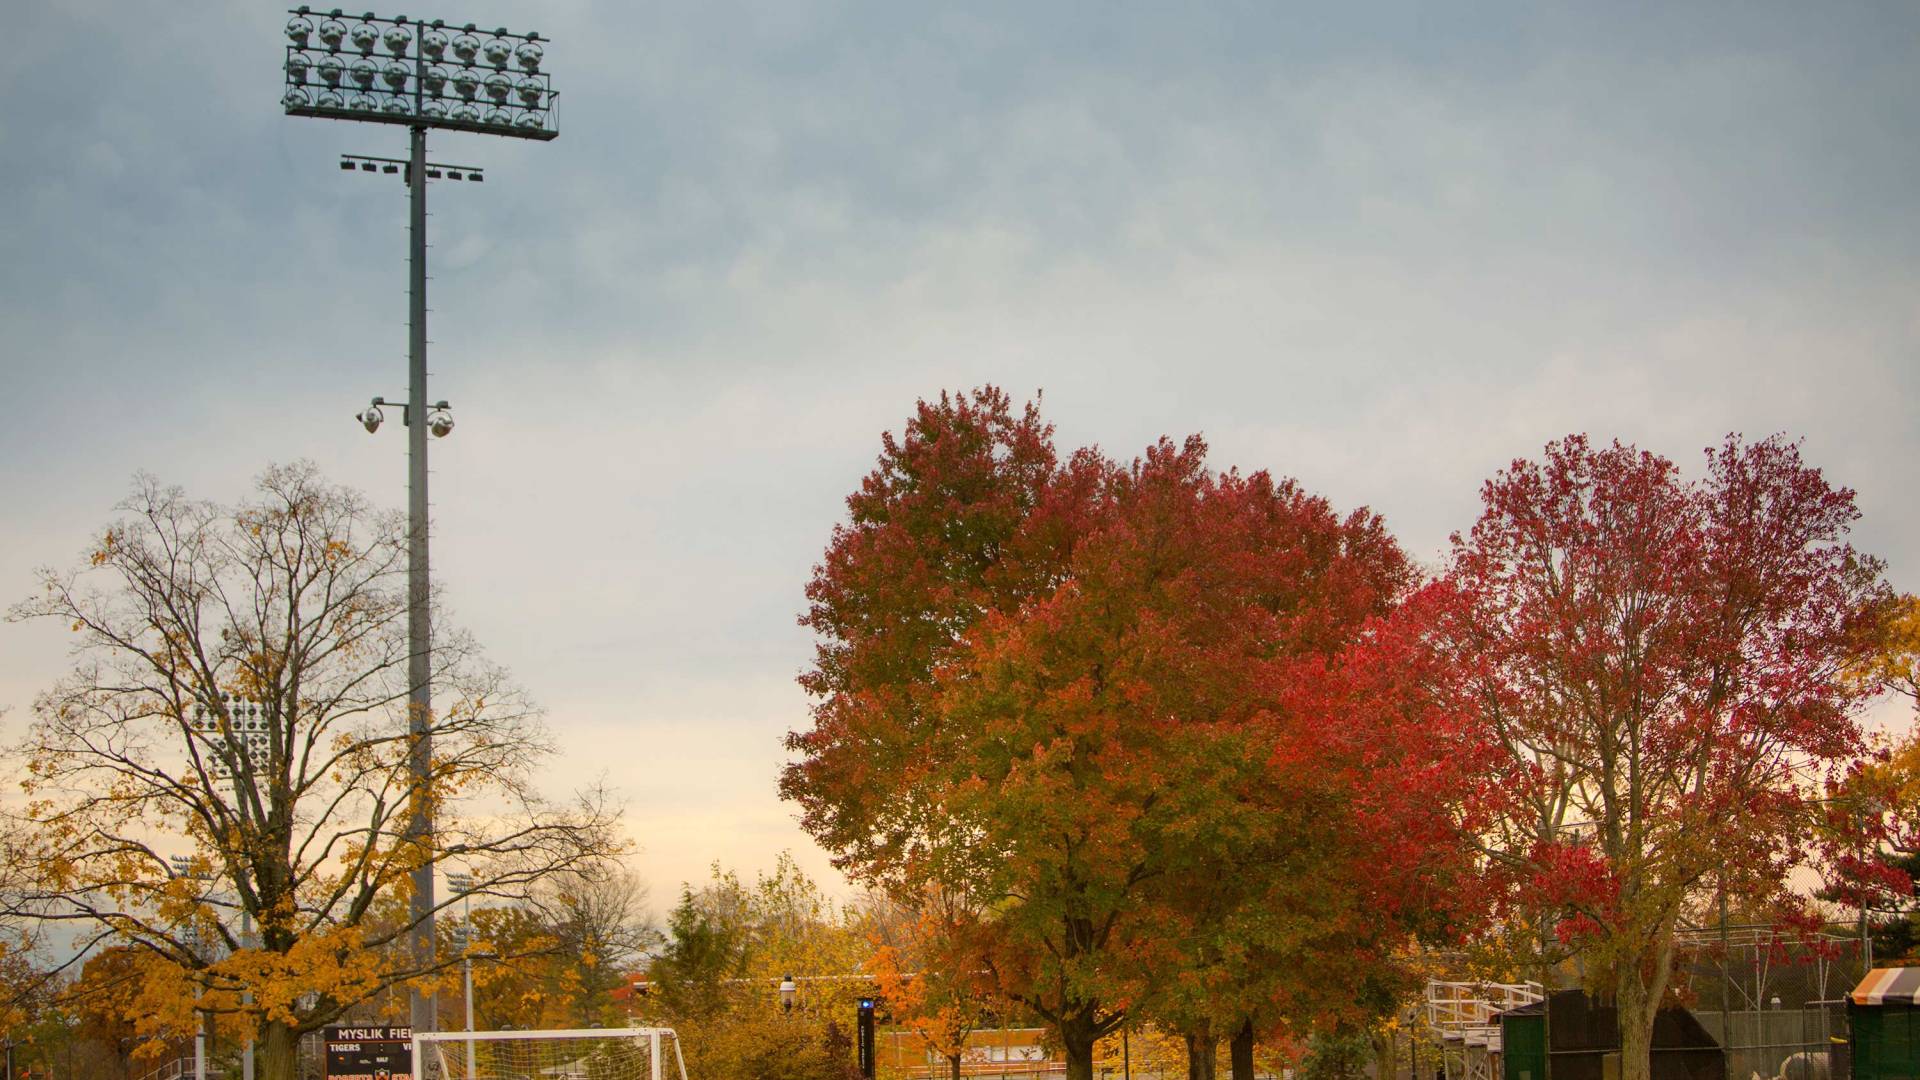 Trees turn color in golden twilight on the soccer field